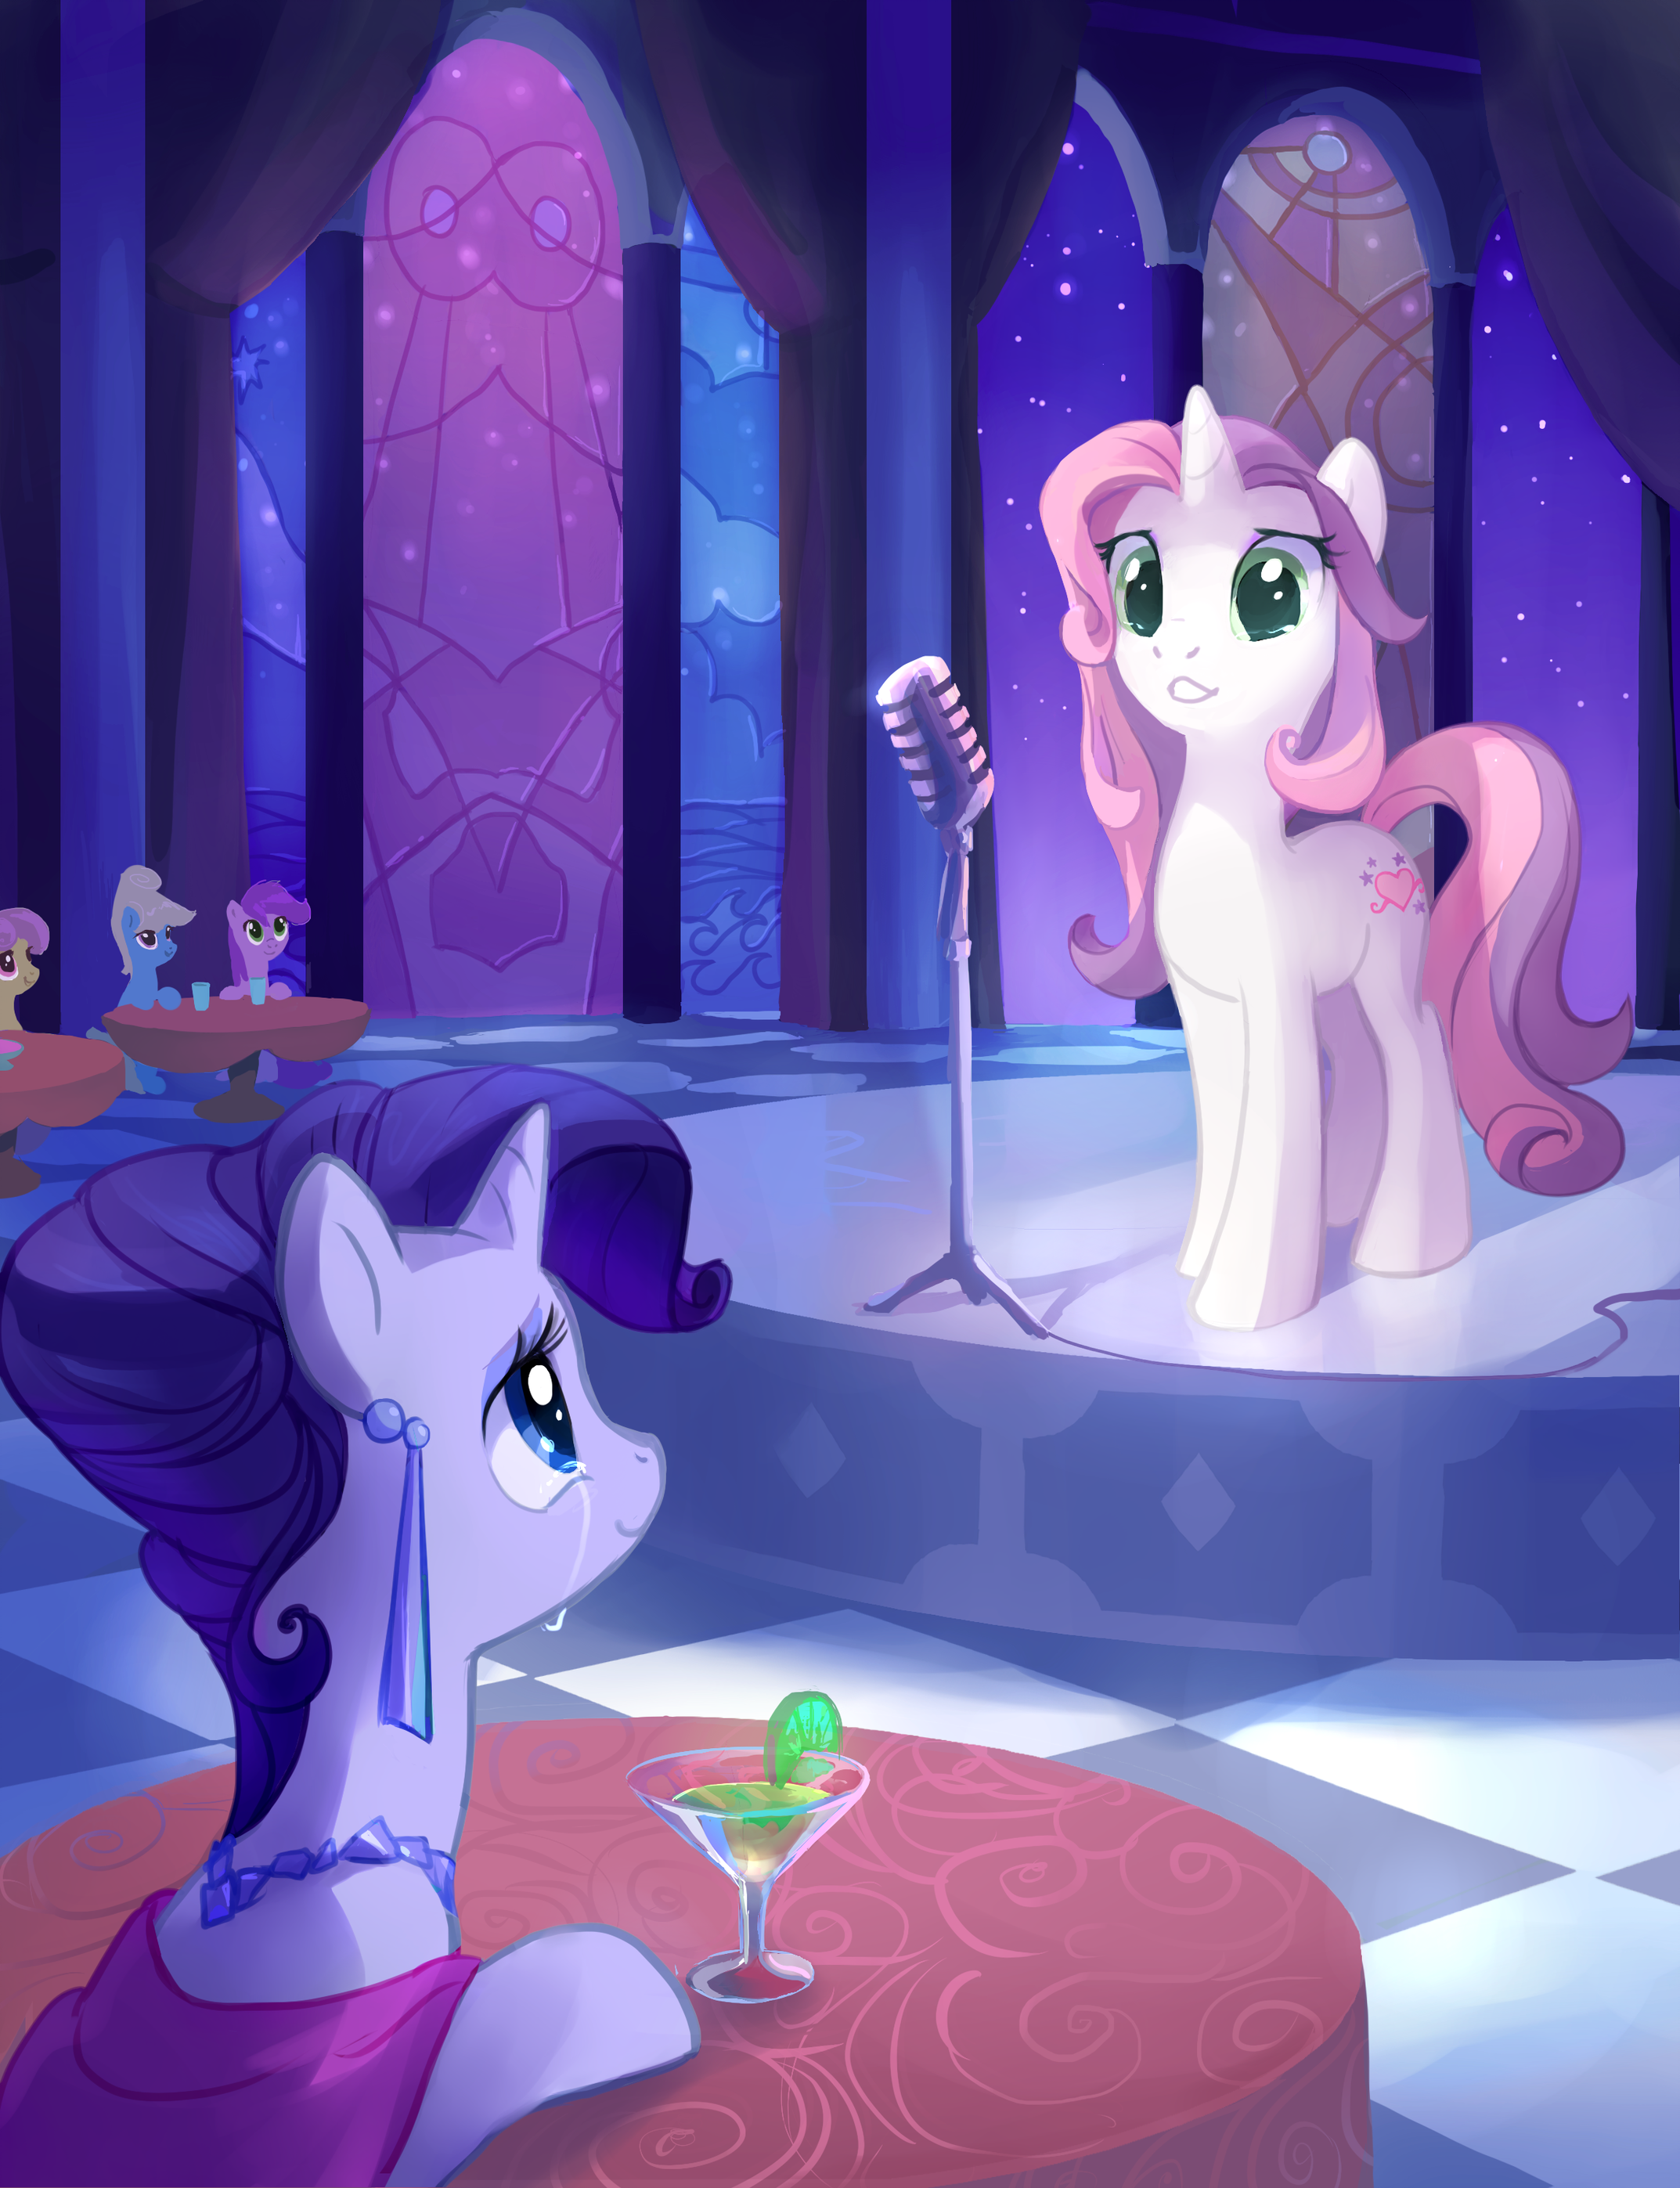 383762__dead+source_safe_artist-colon-tomatocoup_rarity_scootaloo_sweetie+belle_pony_unicorn_alternate+cutie+mark_alternate+hairstyle_bipedal+leaning_canterlot.png